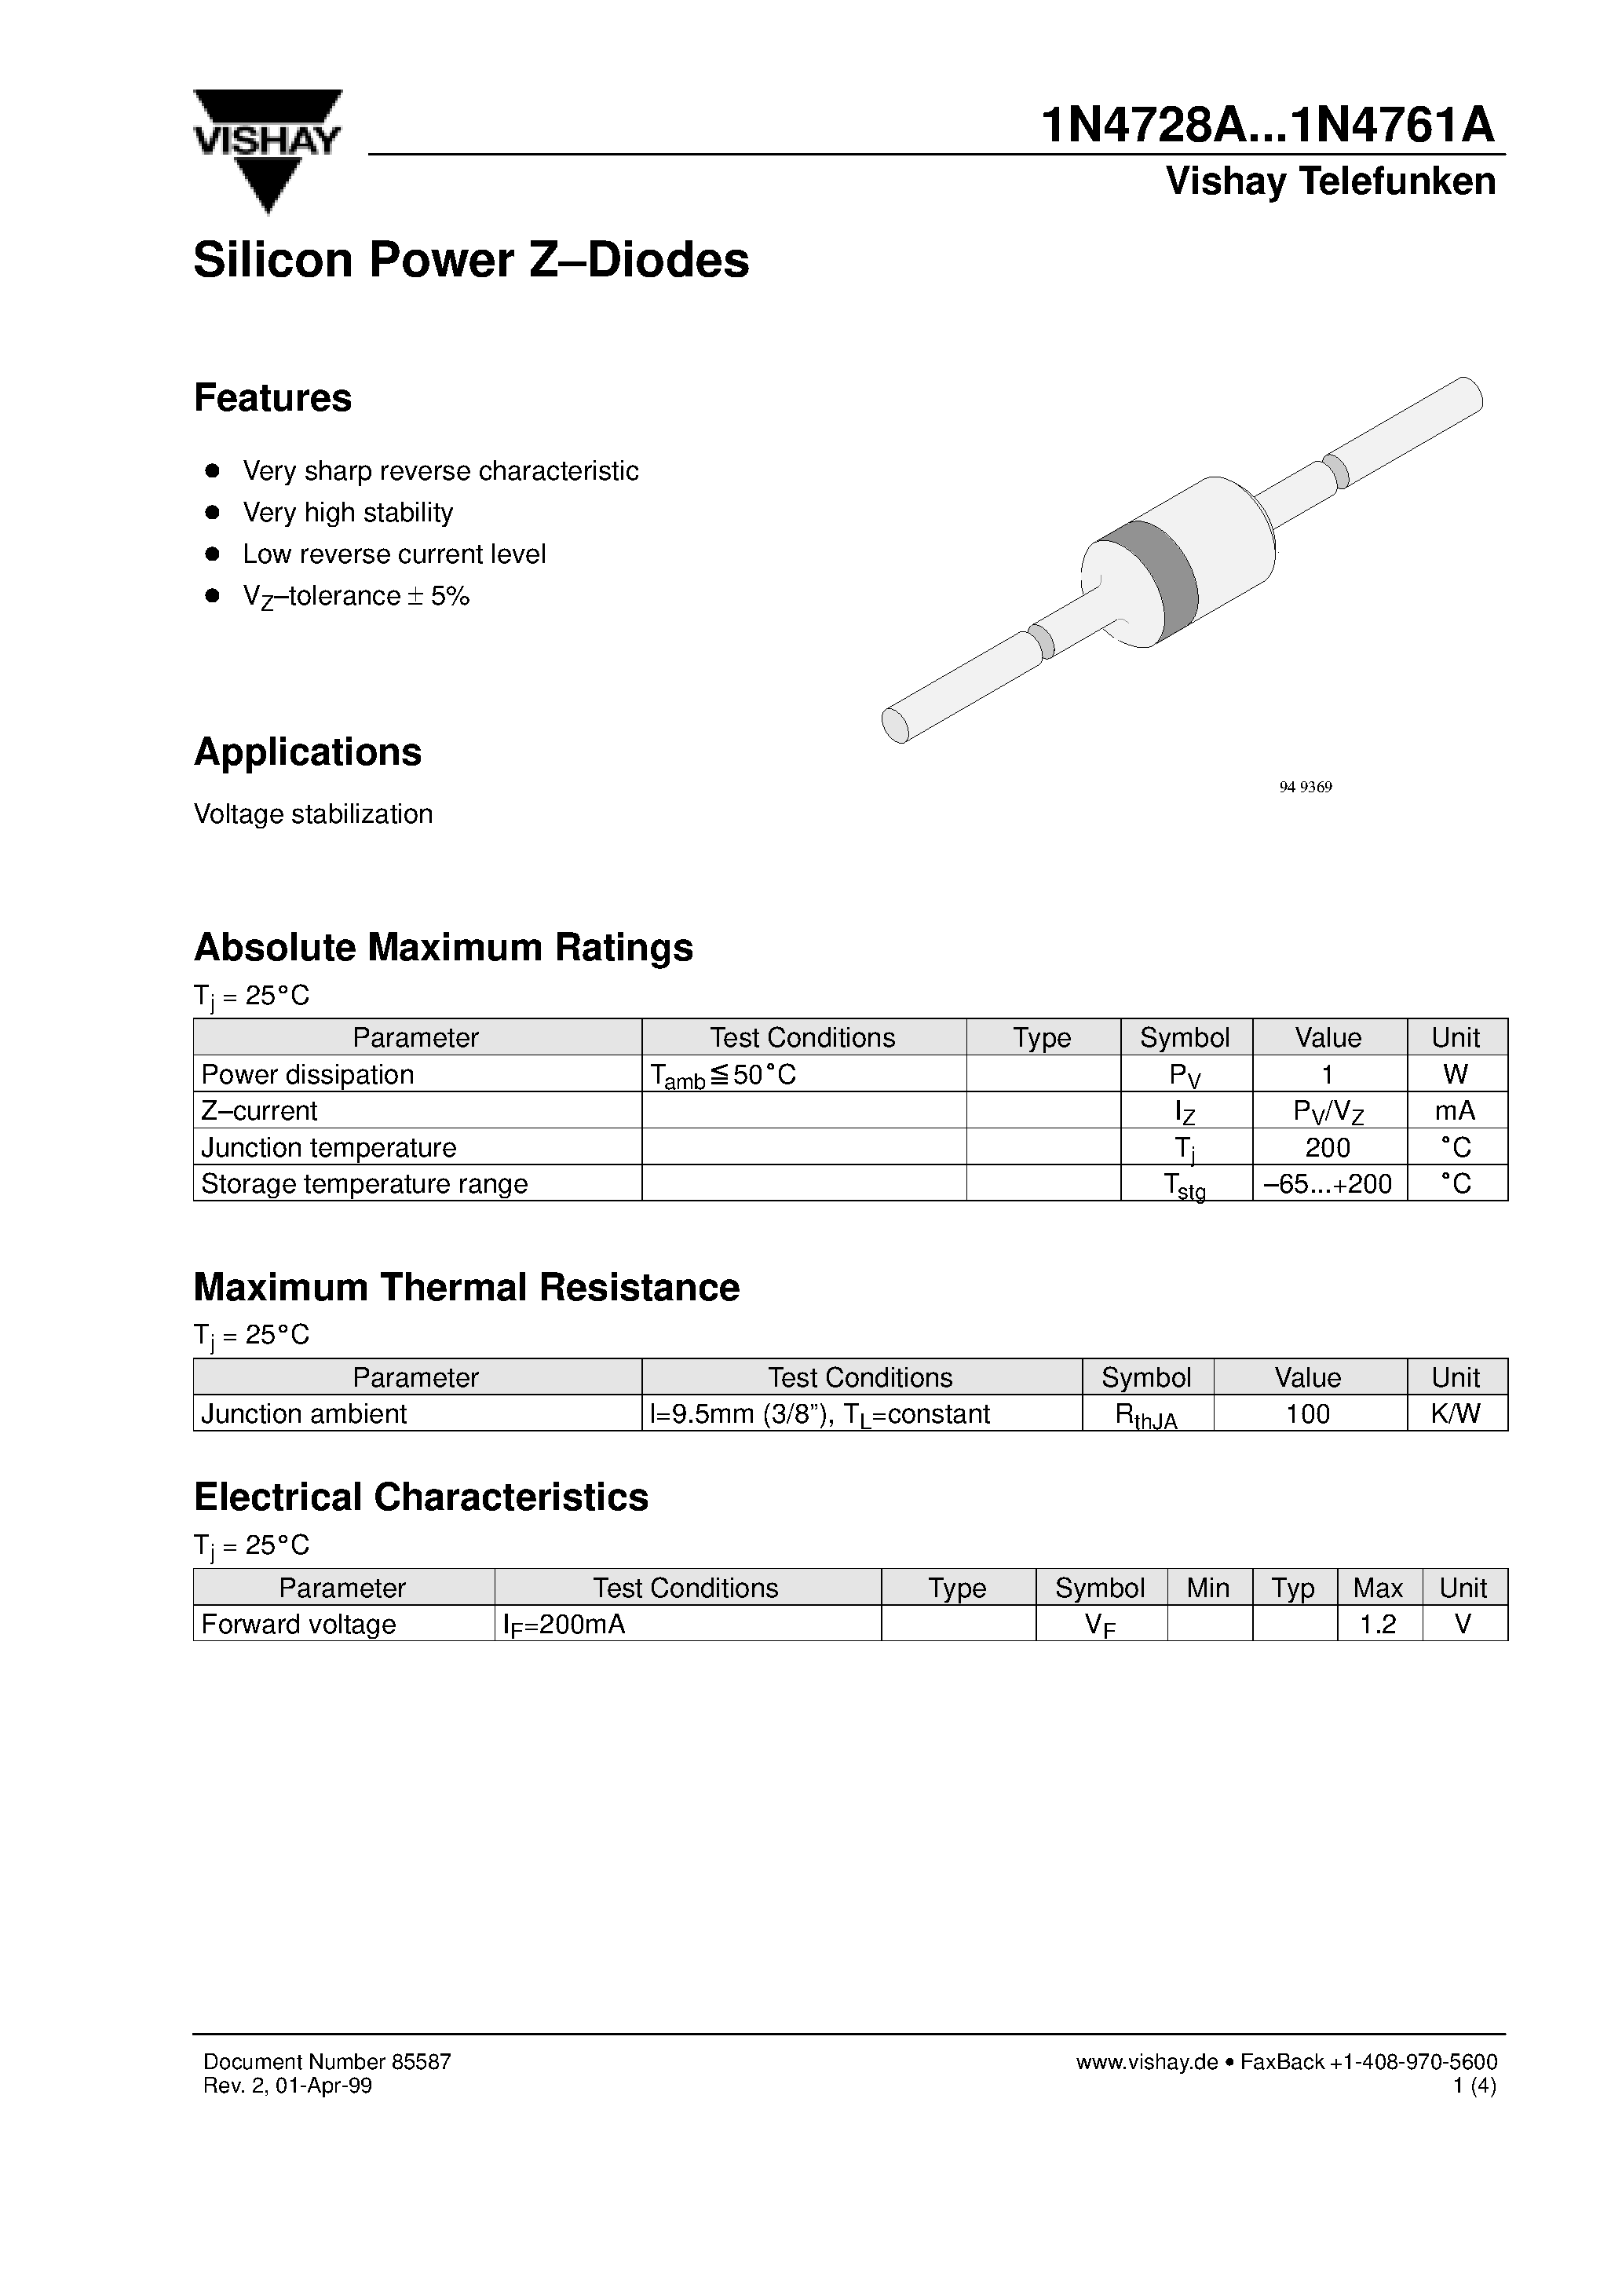 Datasheet 1N4745A - Silicon Power Z-Diodes page 1